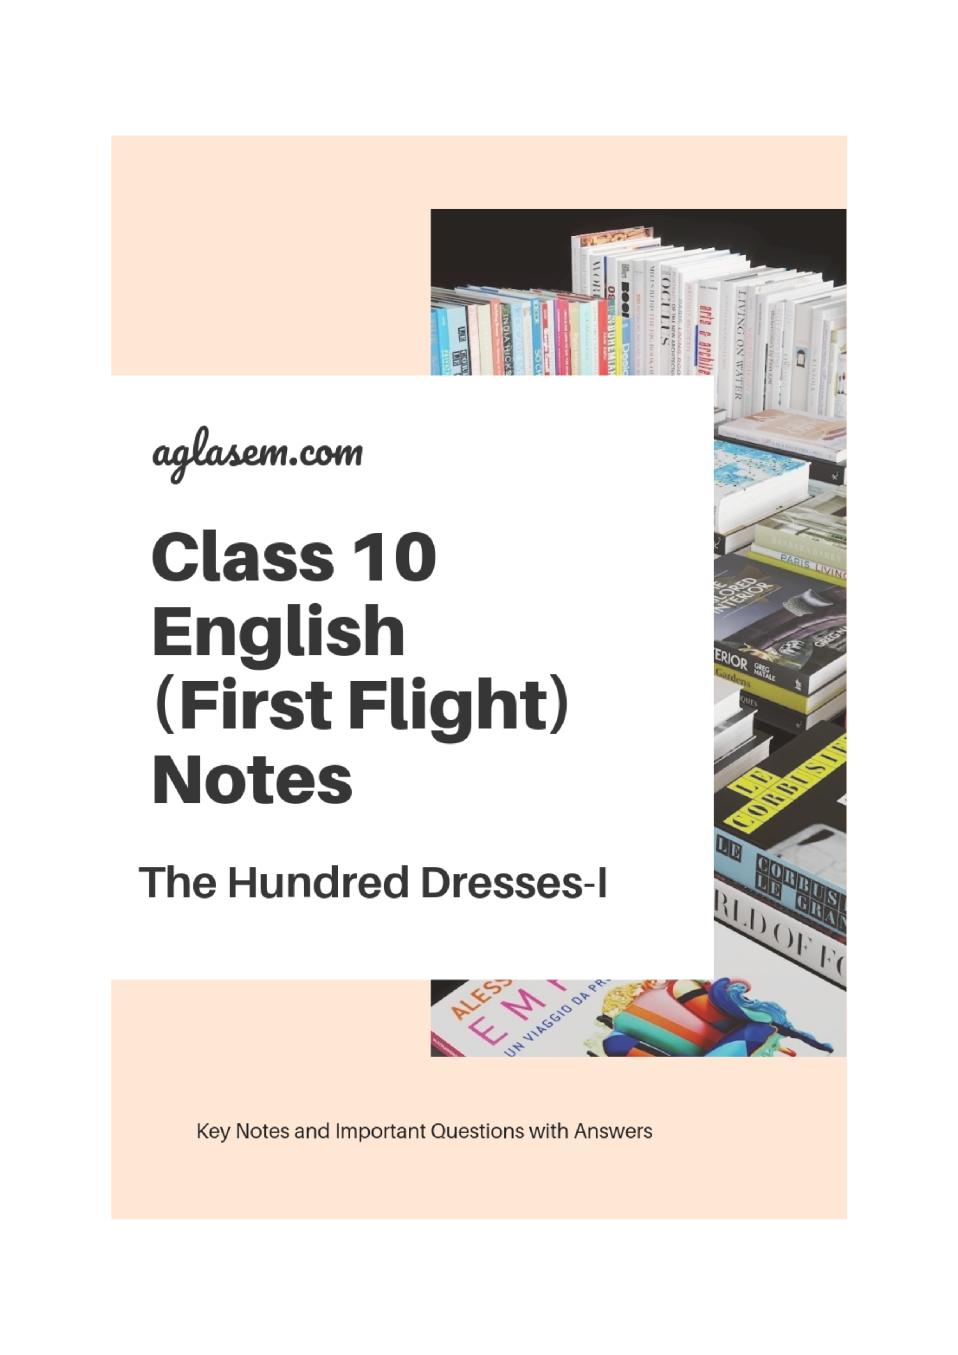 Class 10 English First Flight Notes For The Hundred Dresses-I - Page 1